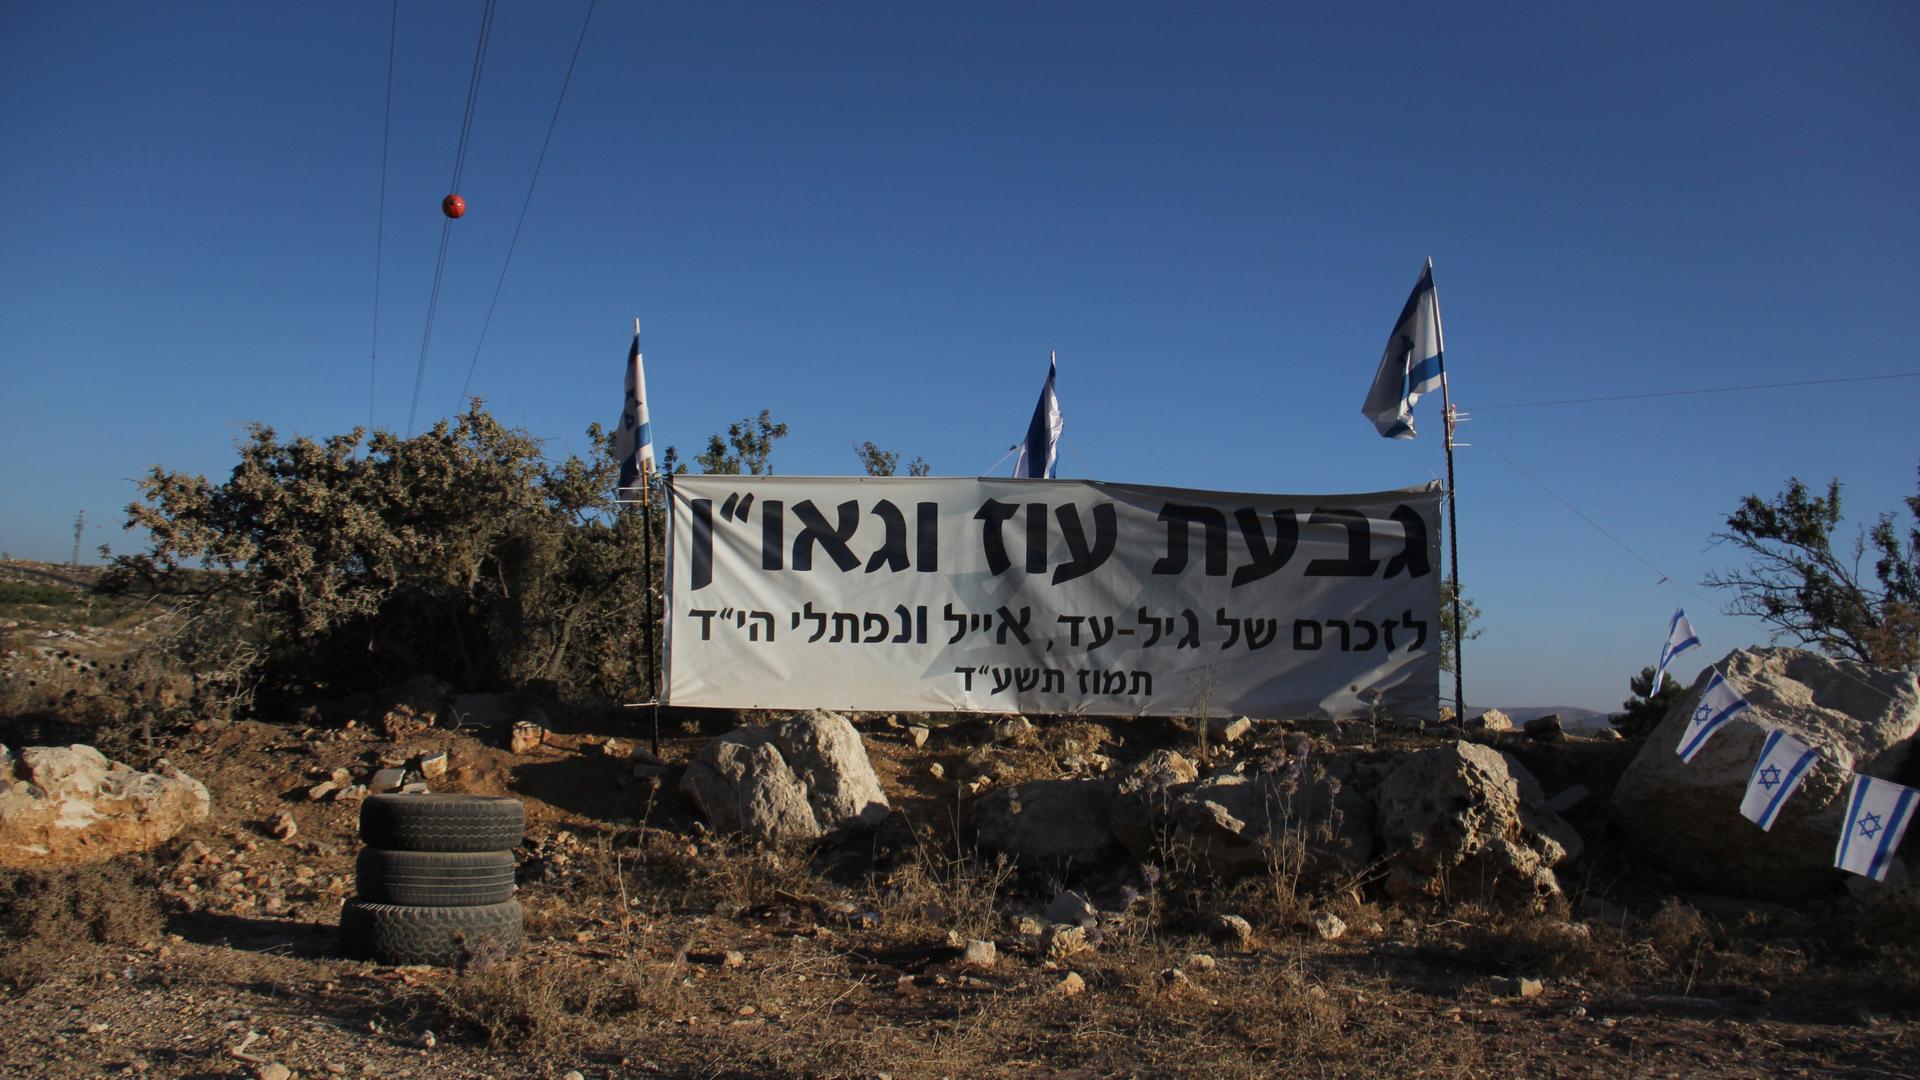 A sign at the entrance to Giv’at Oz veGa’on, a new outpost established by Israeli settlers in the West Bank in the name of three teenagers killed in June.